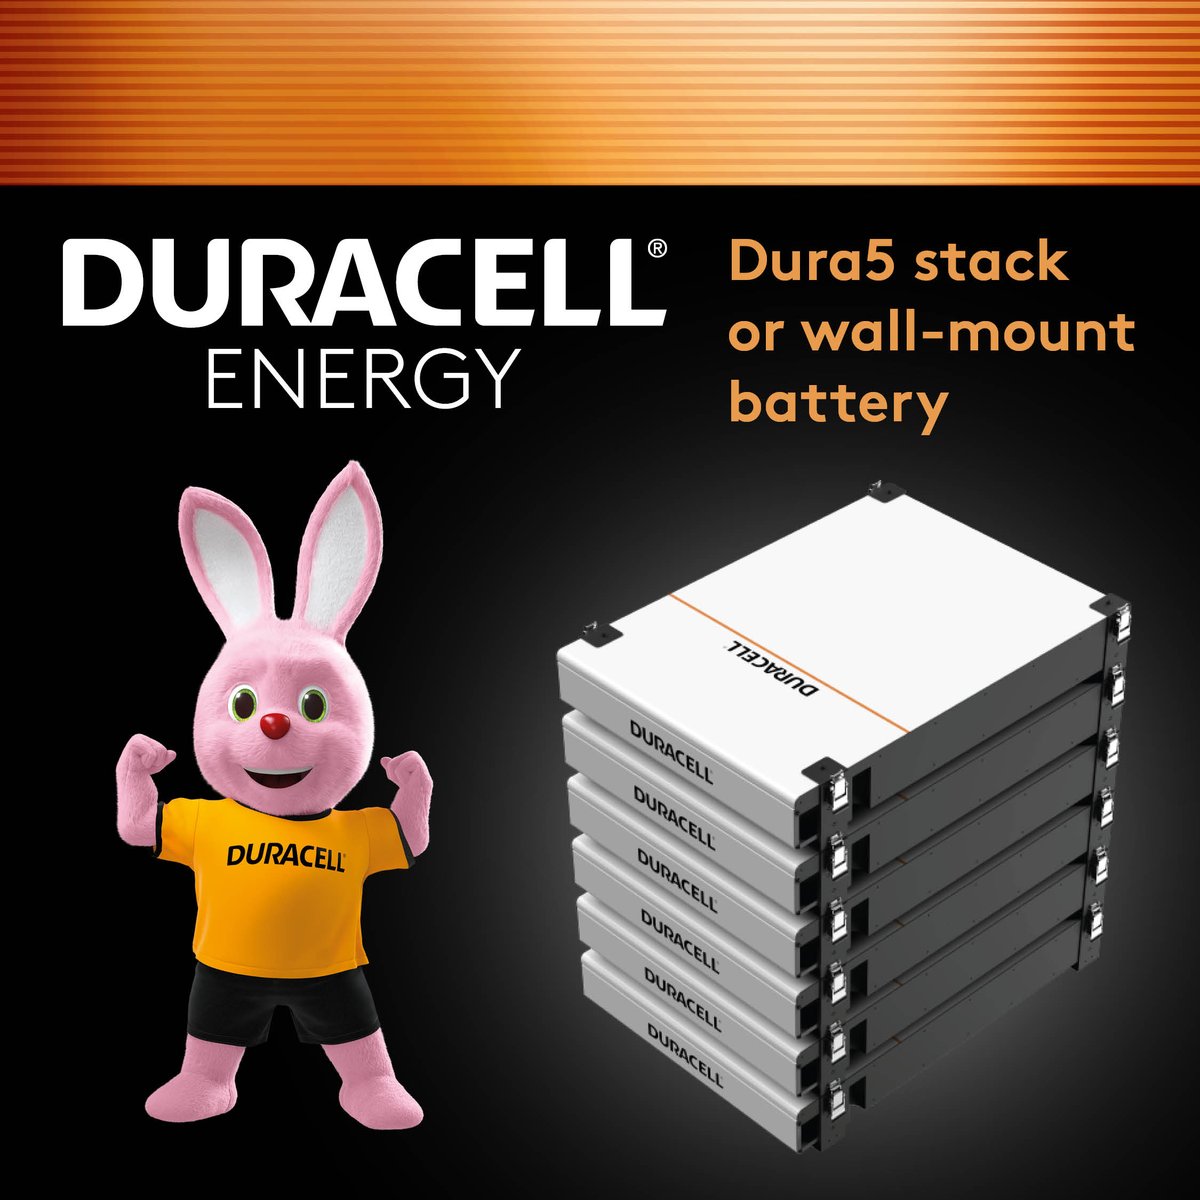 Stacks of potential!
If required, you can stack up to 32 Dura5 batteries in one installation giving you a mammoth 160kWh!
Available from May 2024
Get a quote in 30 seconds for your unique install here:
bit.ly/4bcKRE6

#GetAQuote #HomeEnergyStorage #DURACELLEnergyUK